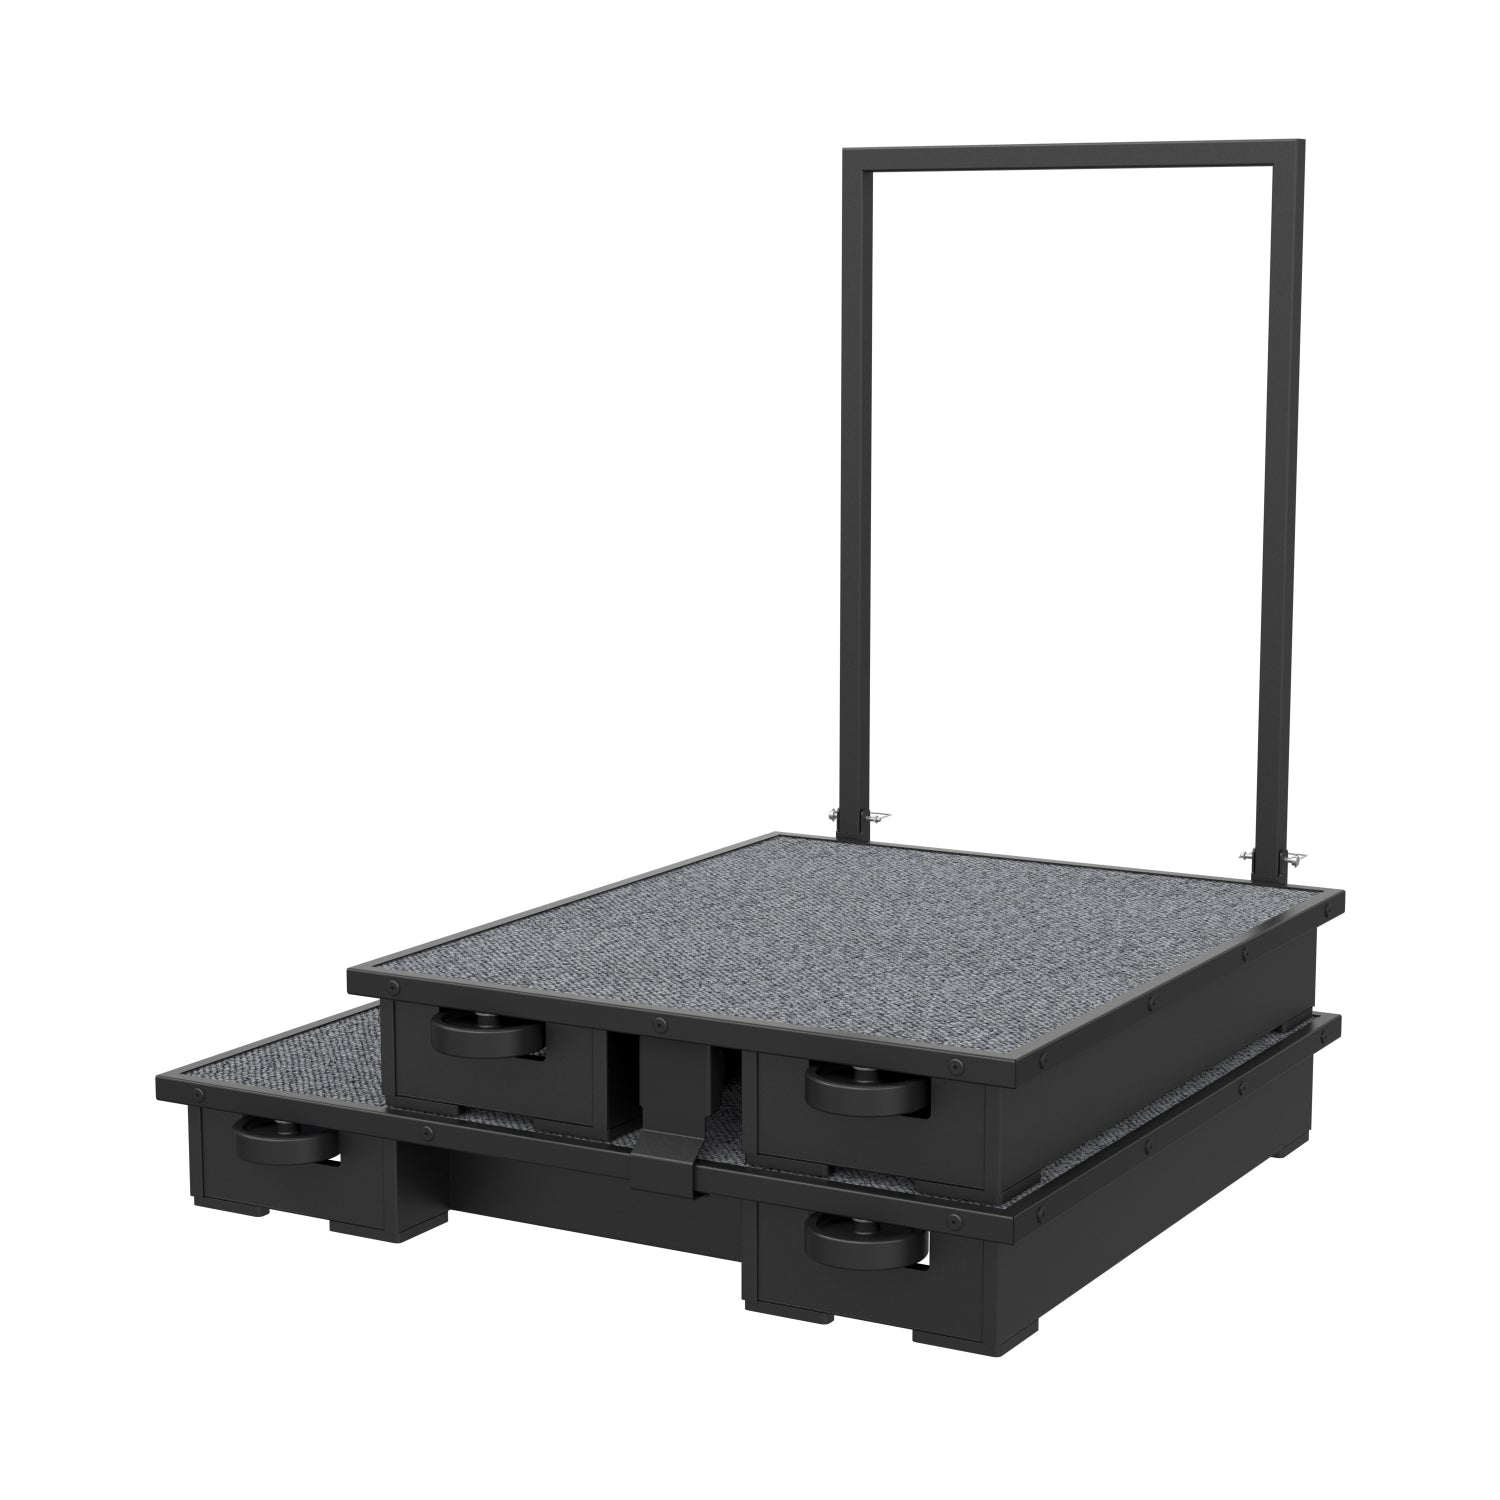 Bandstor™ Double Conductor's Podium with Rail